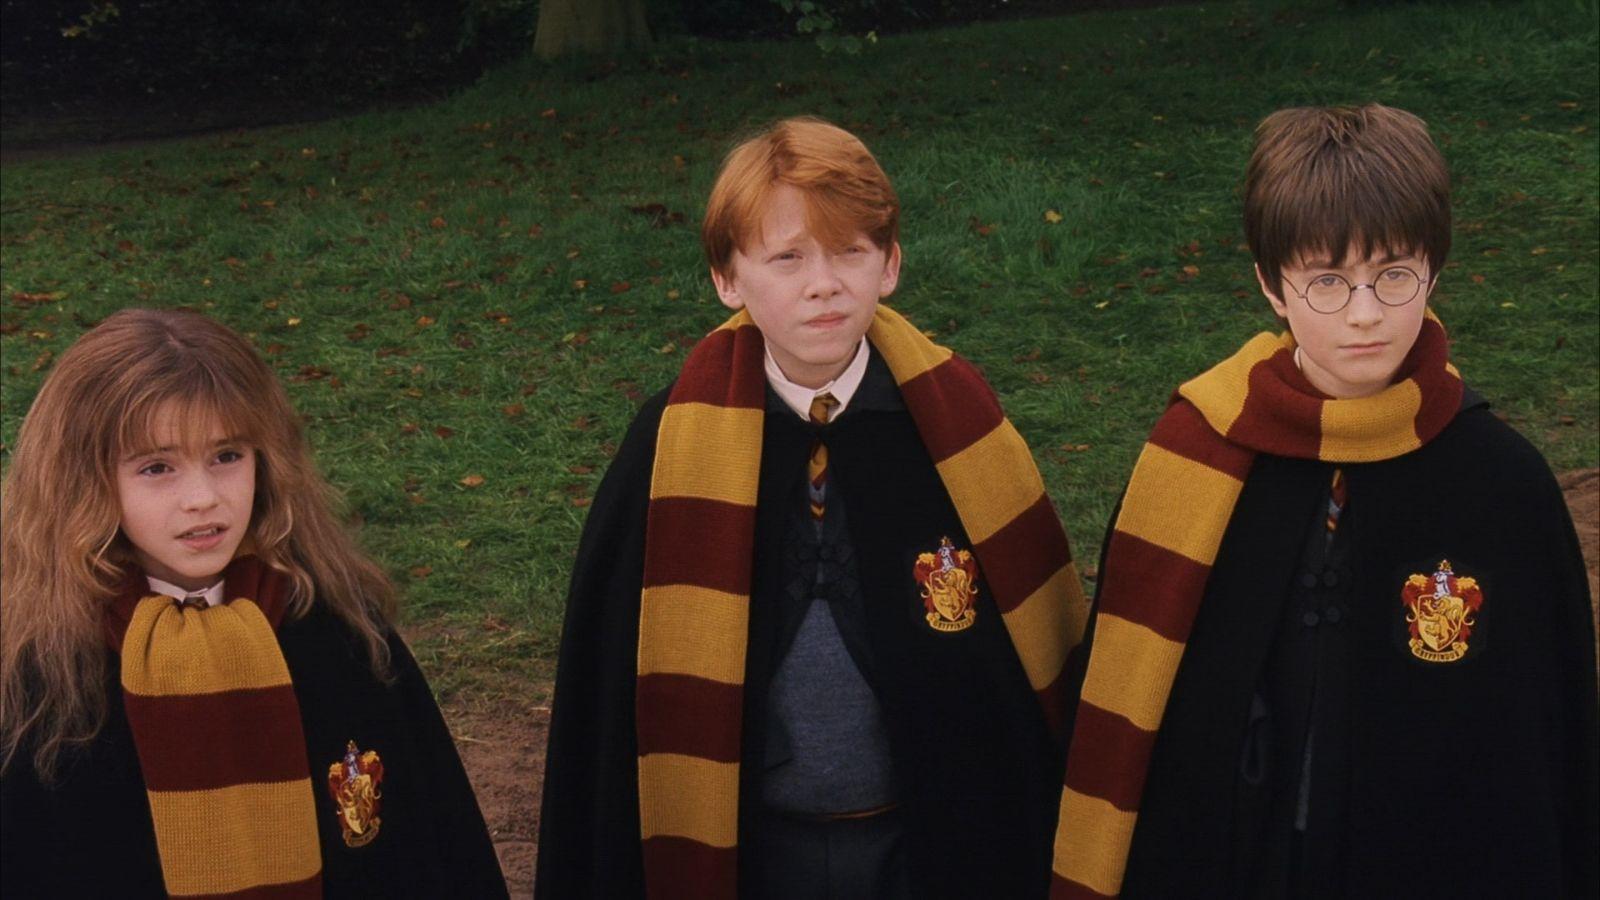 Hermione, Ron, and Harry in Harry Potter.